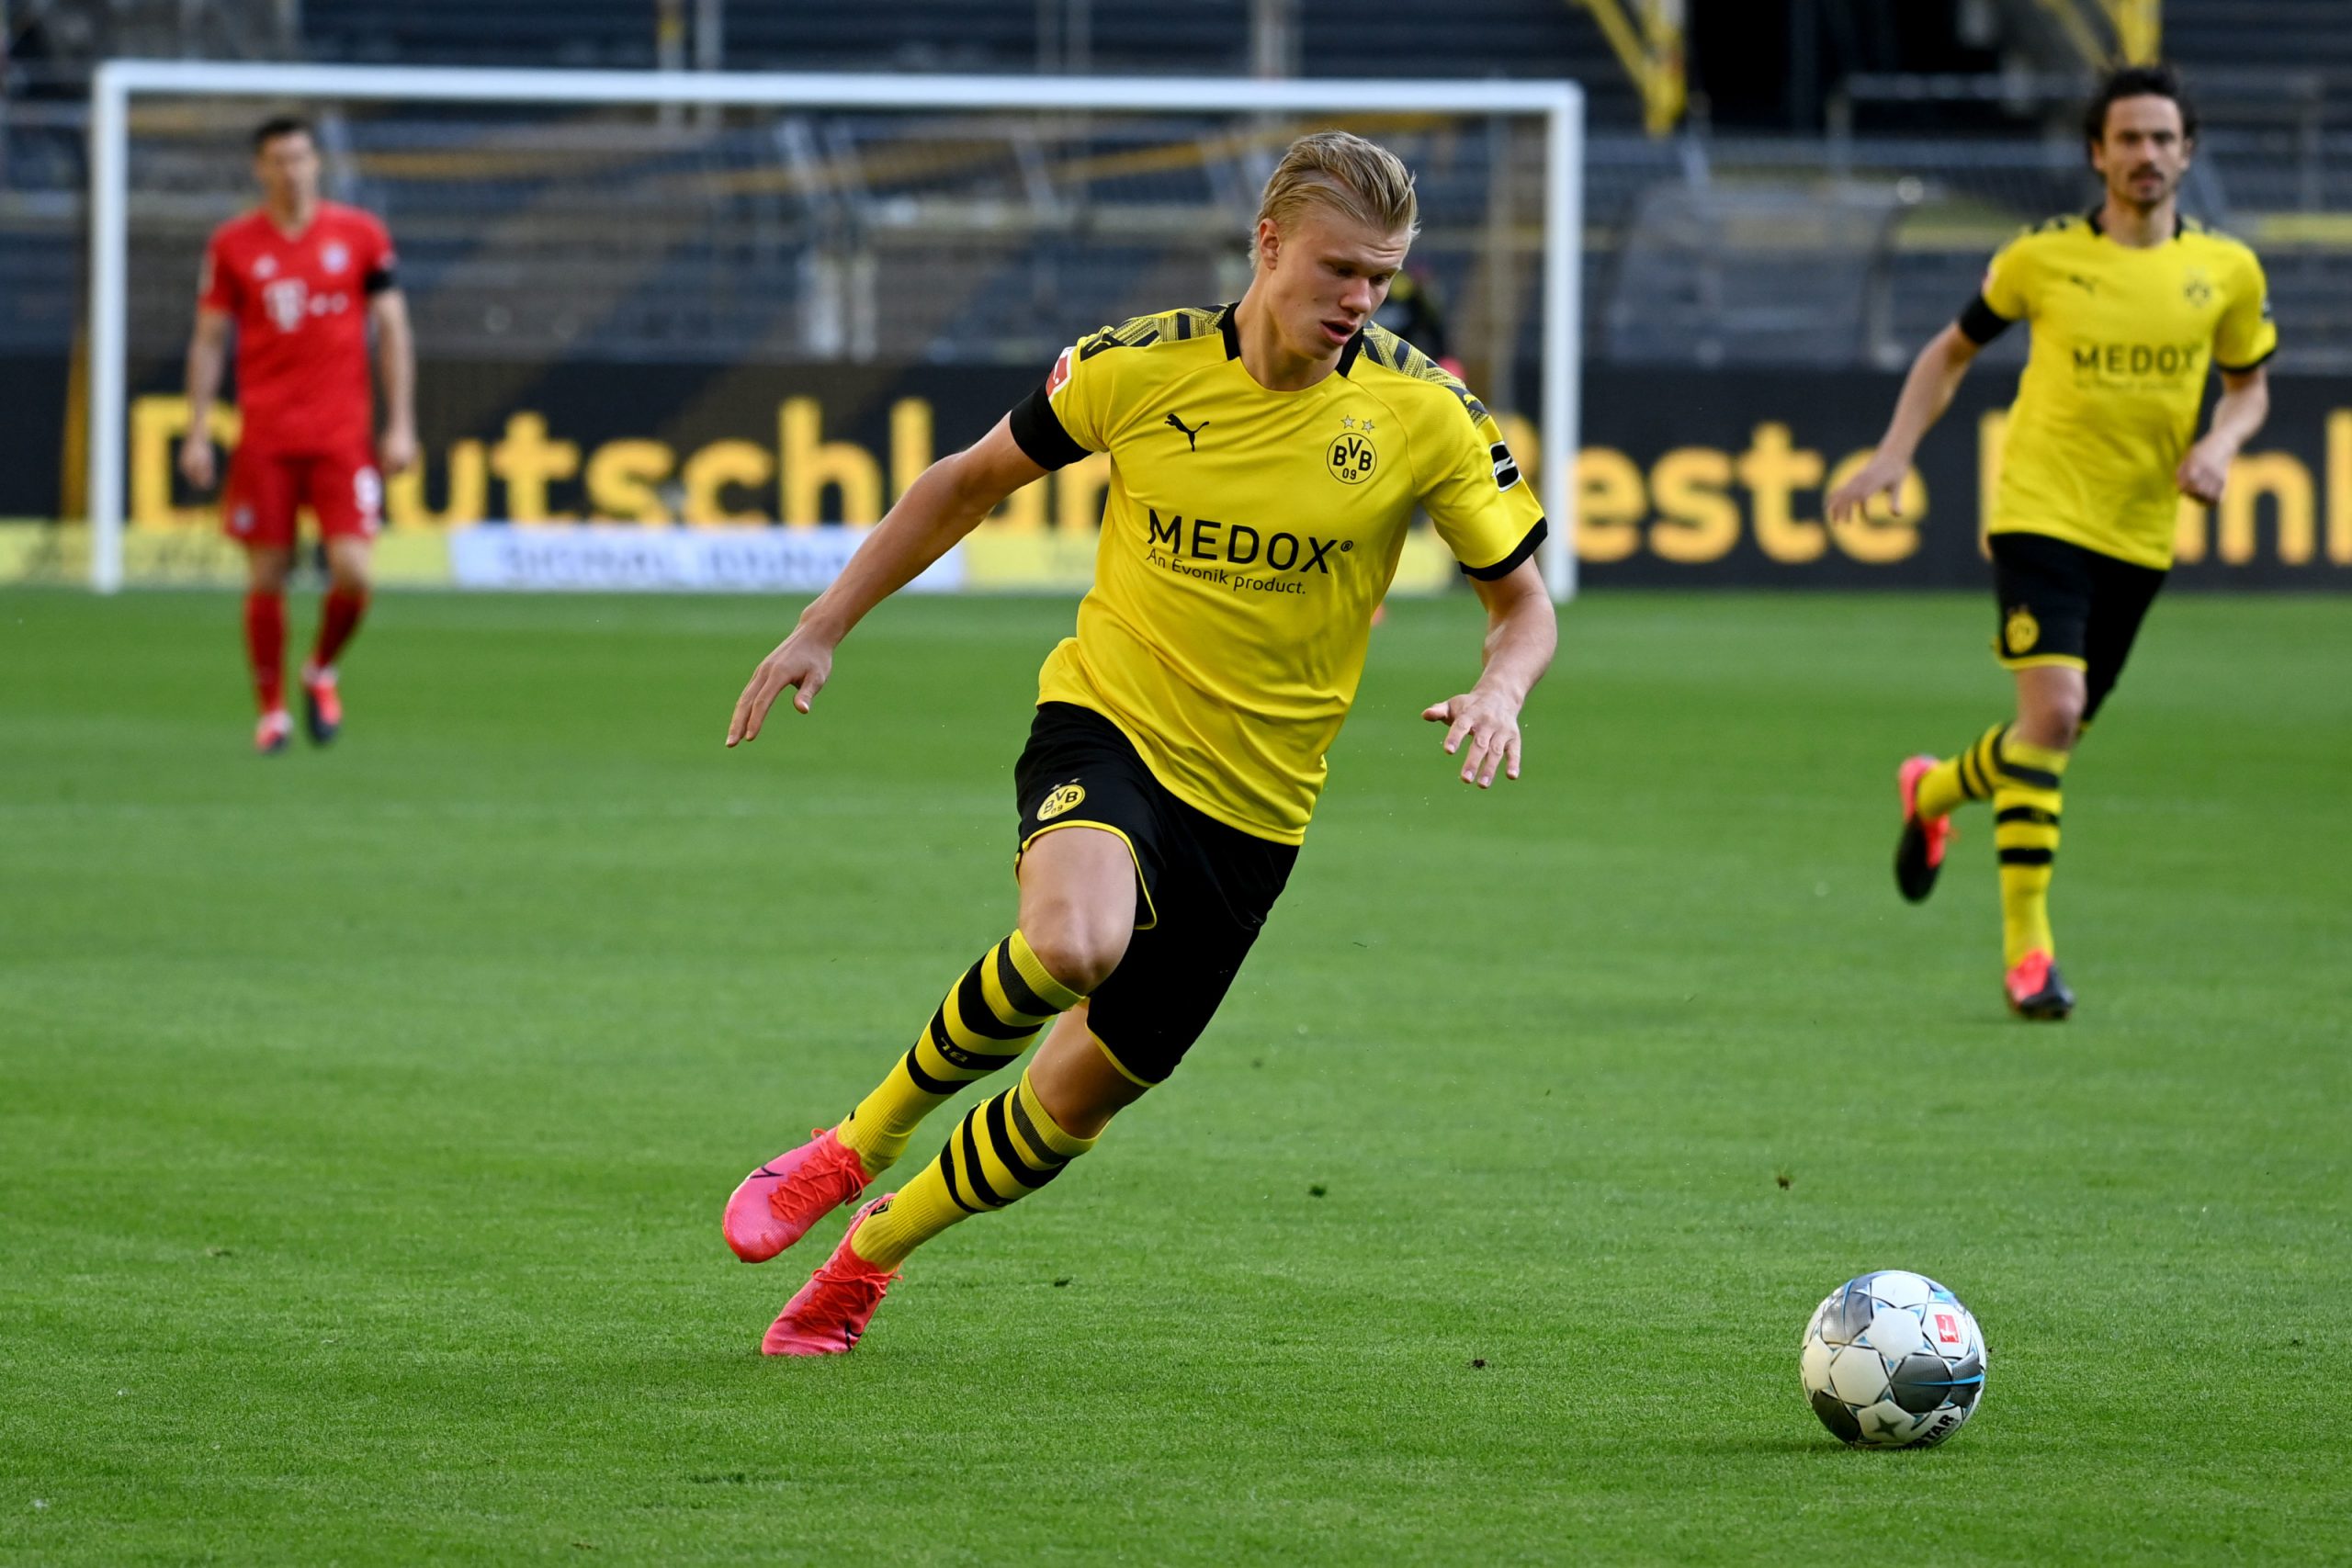 Chelsea receive Erling Haaland boost following Dortmund admission.